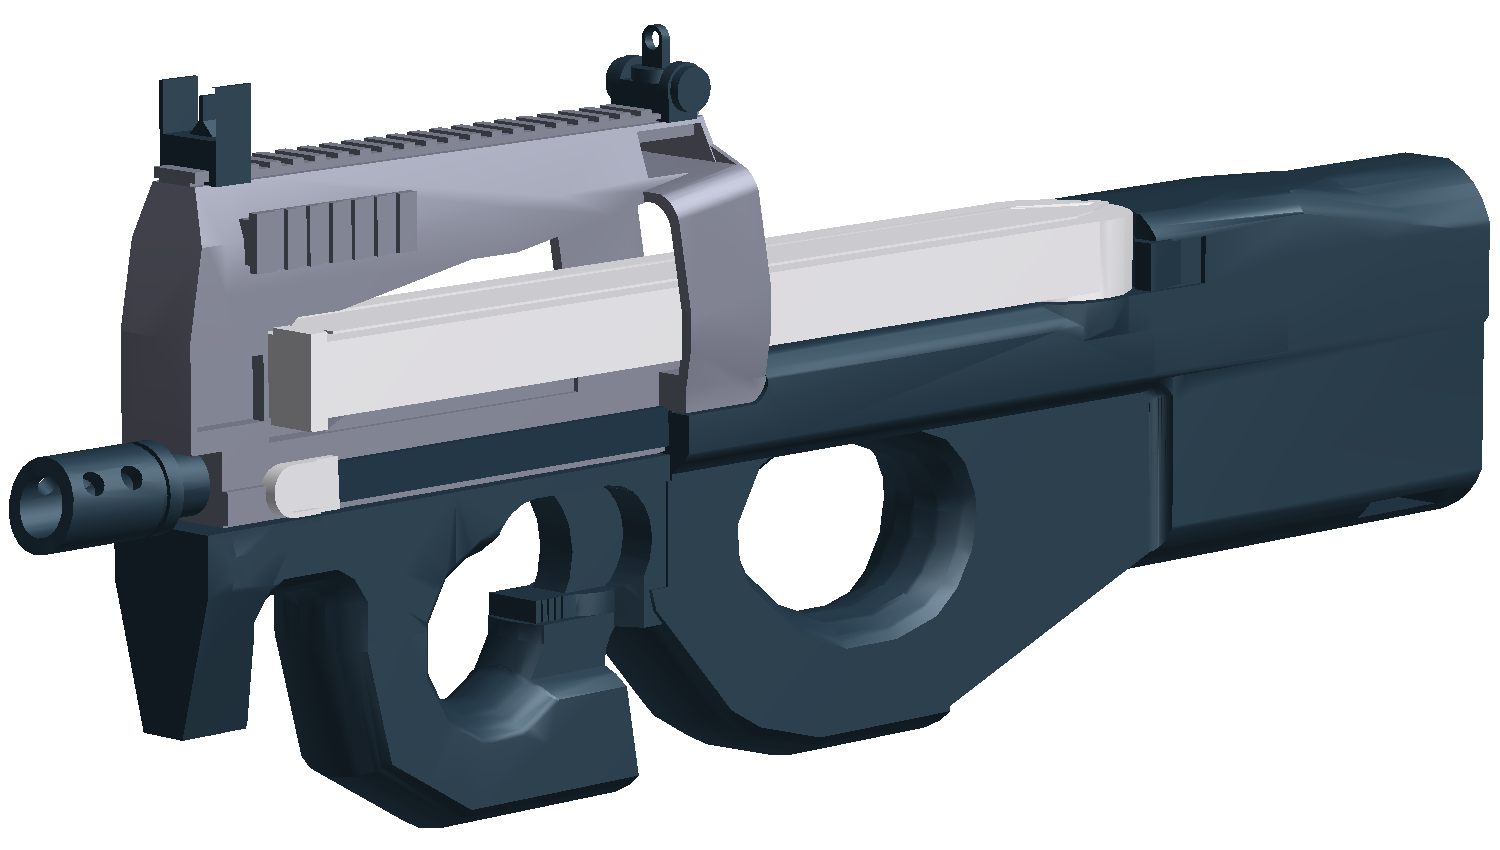 What Is The Best Weapon In Roblox Phantom Forces - roblox fn p90 t shirt